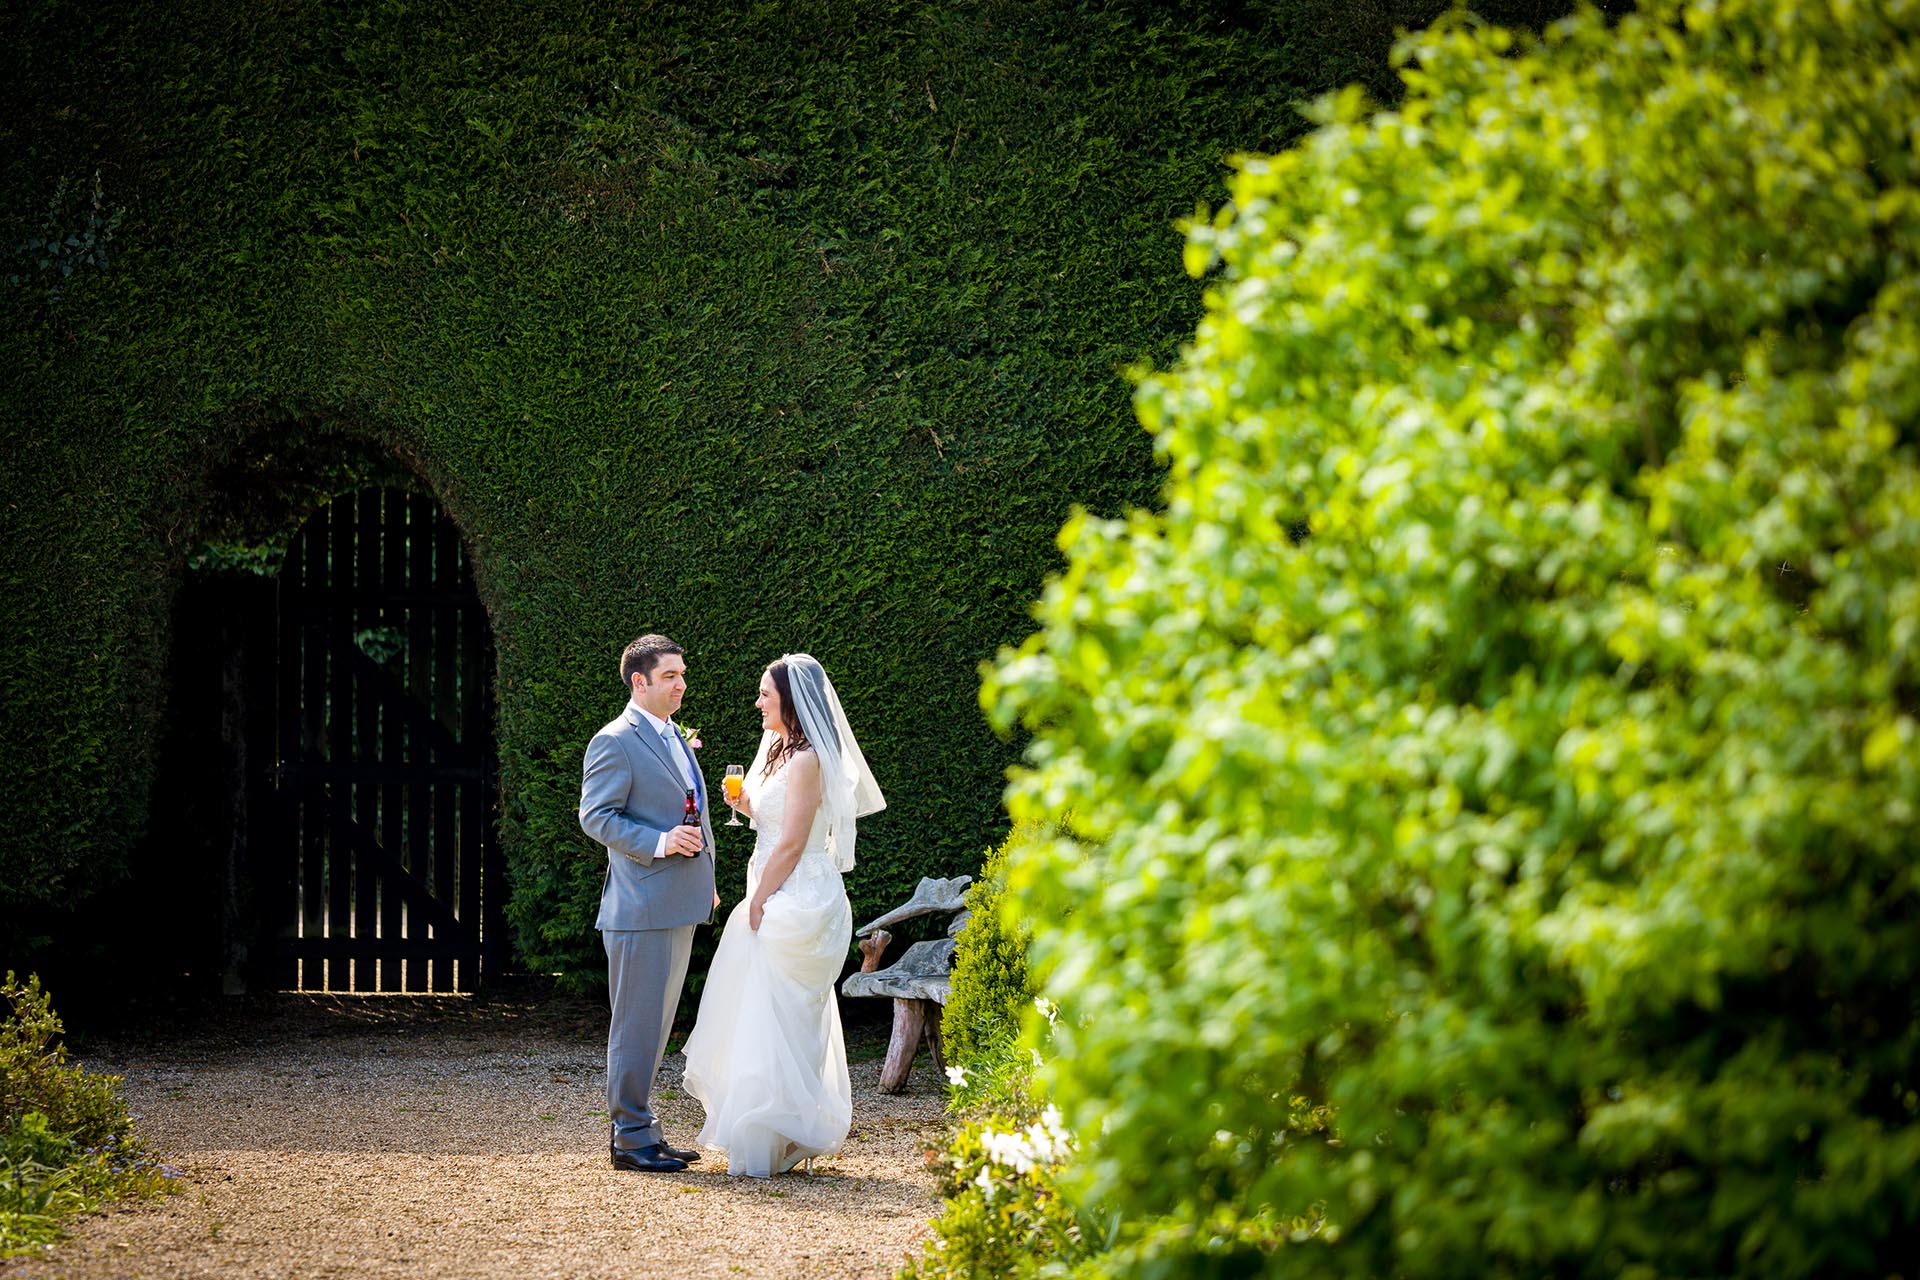 Essex wedding photographer at Gaynes Park Coopersale Epping